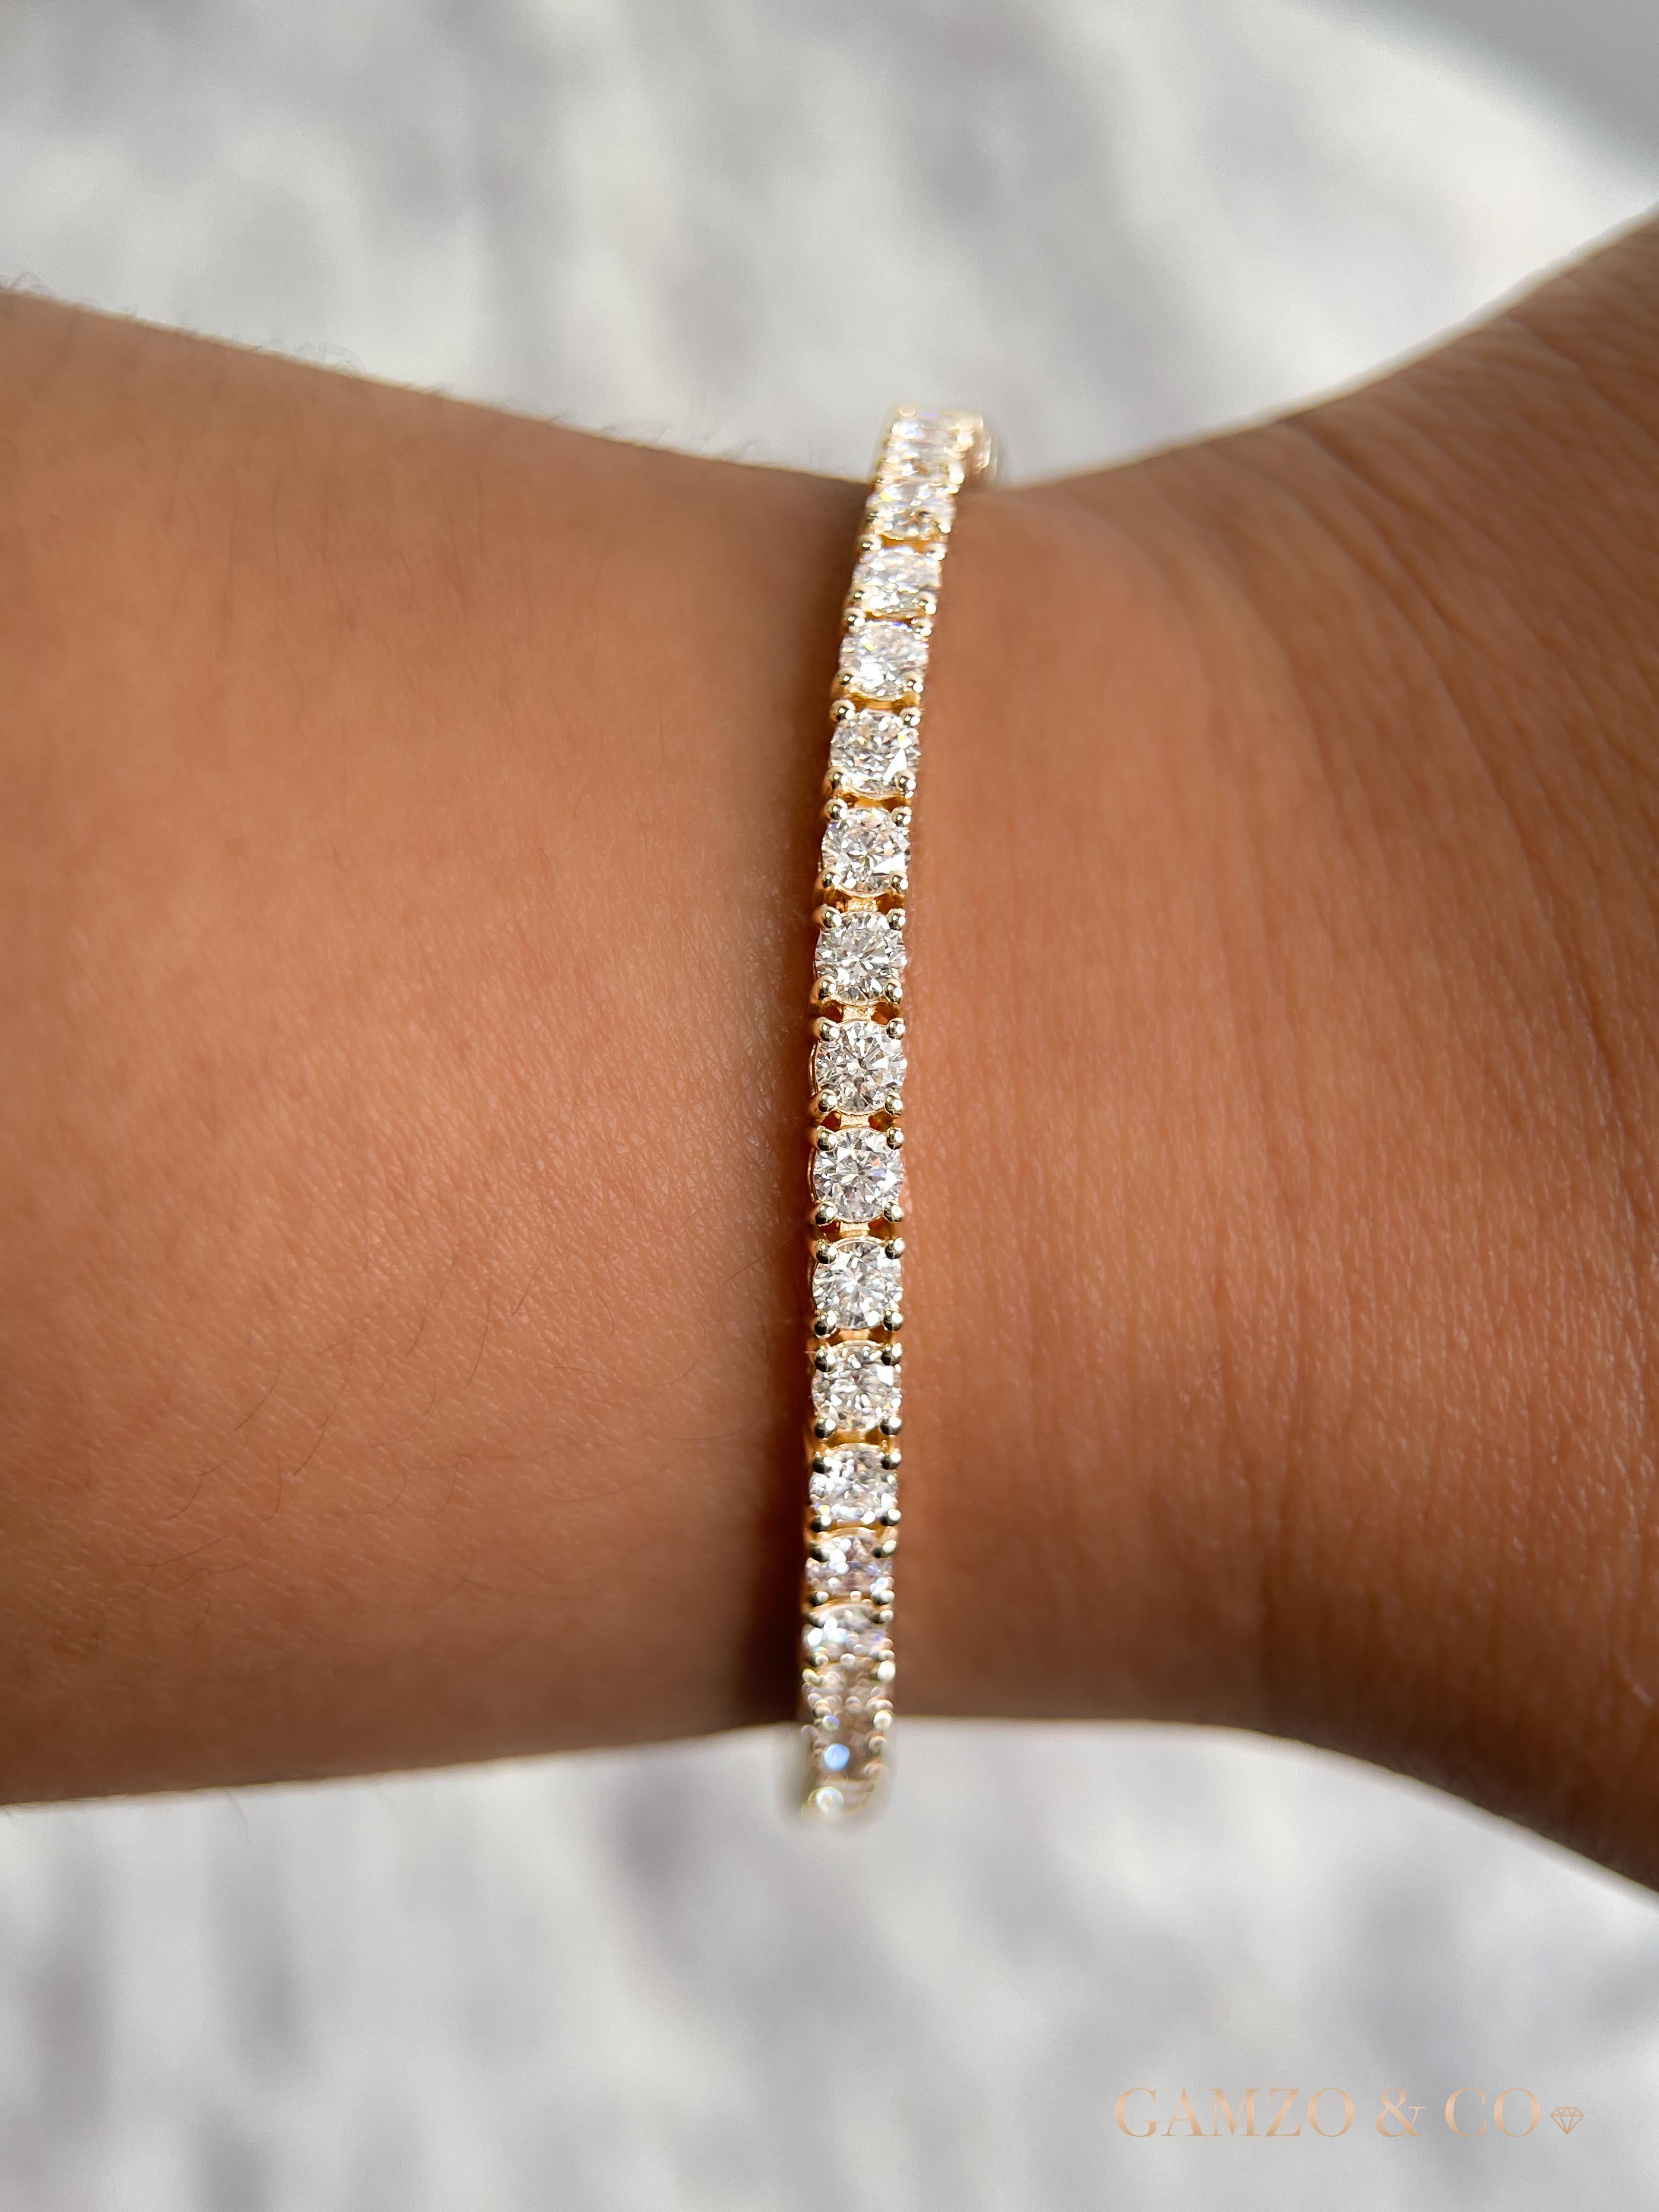 This diamond tennis bracelet features beautifully cut round diamonds set gorgeously in 14k gold.

Metal: 14k Gold
Diamond Cut: Round Natural Diamond 
Total Diamond Carats: 5ct
Diamond Clarity: VS
Diamond Color: F-G
Color: Rose Gold
Bracelet Length: